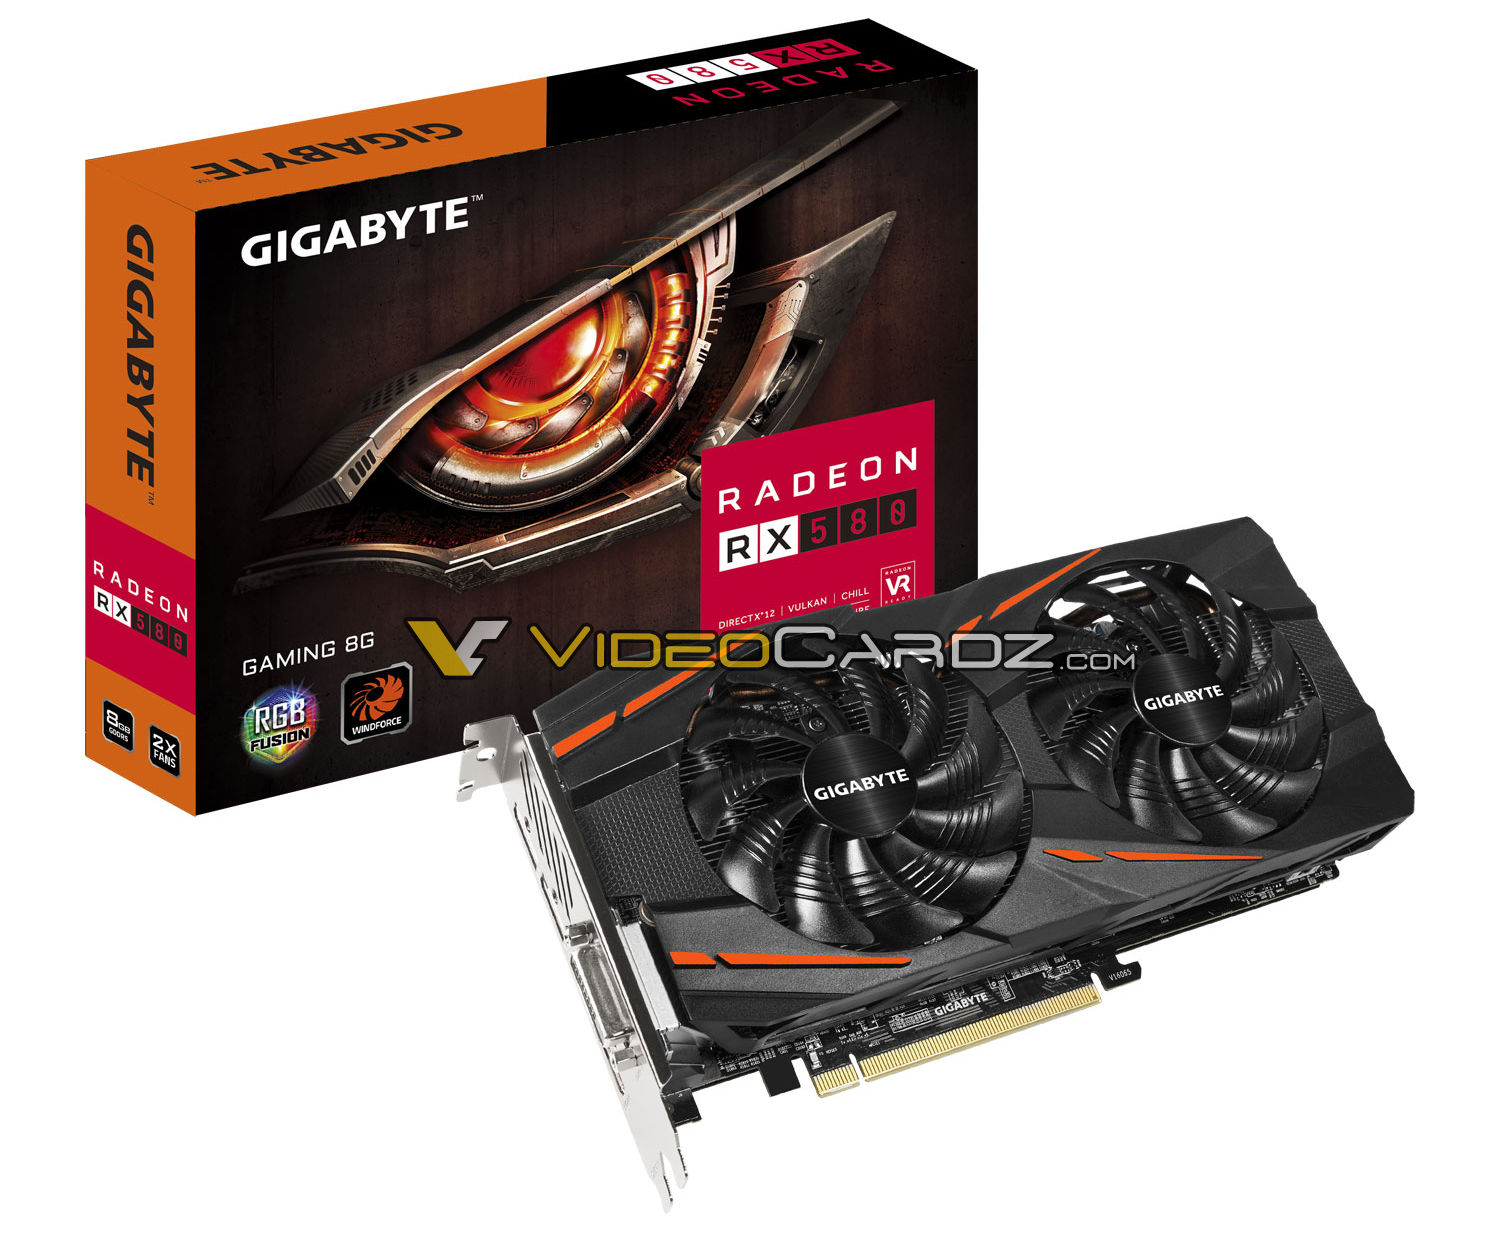 Media asset in full size related to 3dfxzone.it news item entitled as follows: Fotogallery di 9 video card GIGABYTE Radeon RX 500 AORUS e GAMING | Image Name: news26126_GIGABYTE-AORUS-Radeon-RX-500_4.jpg